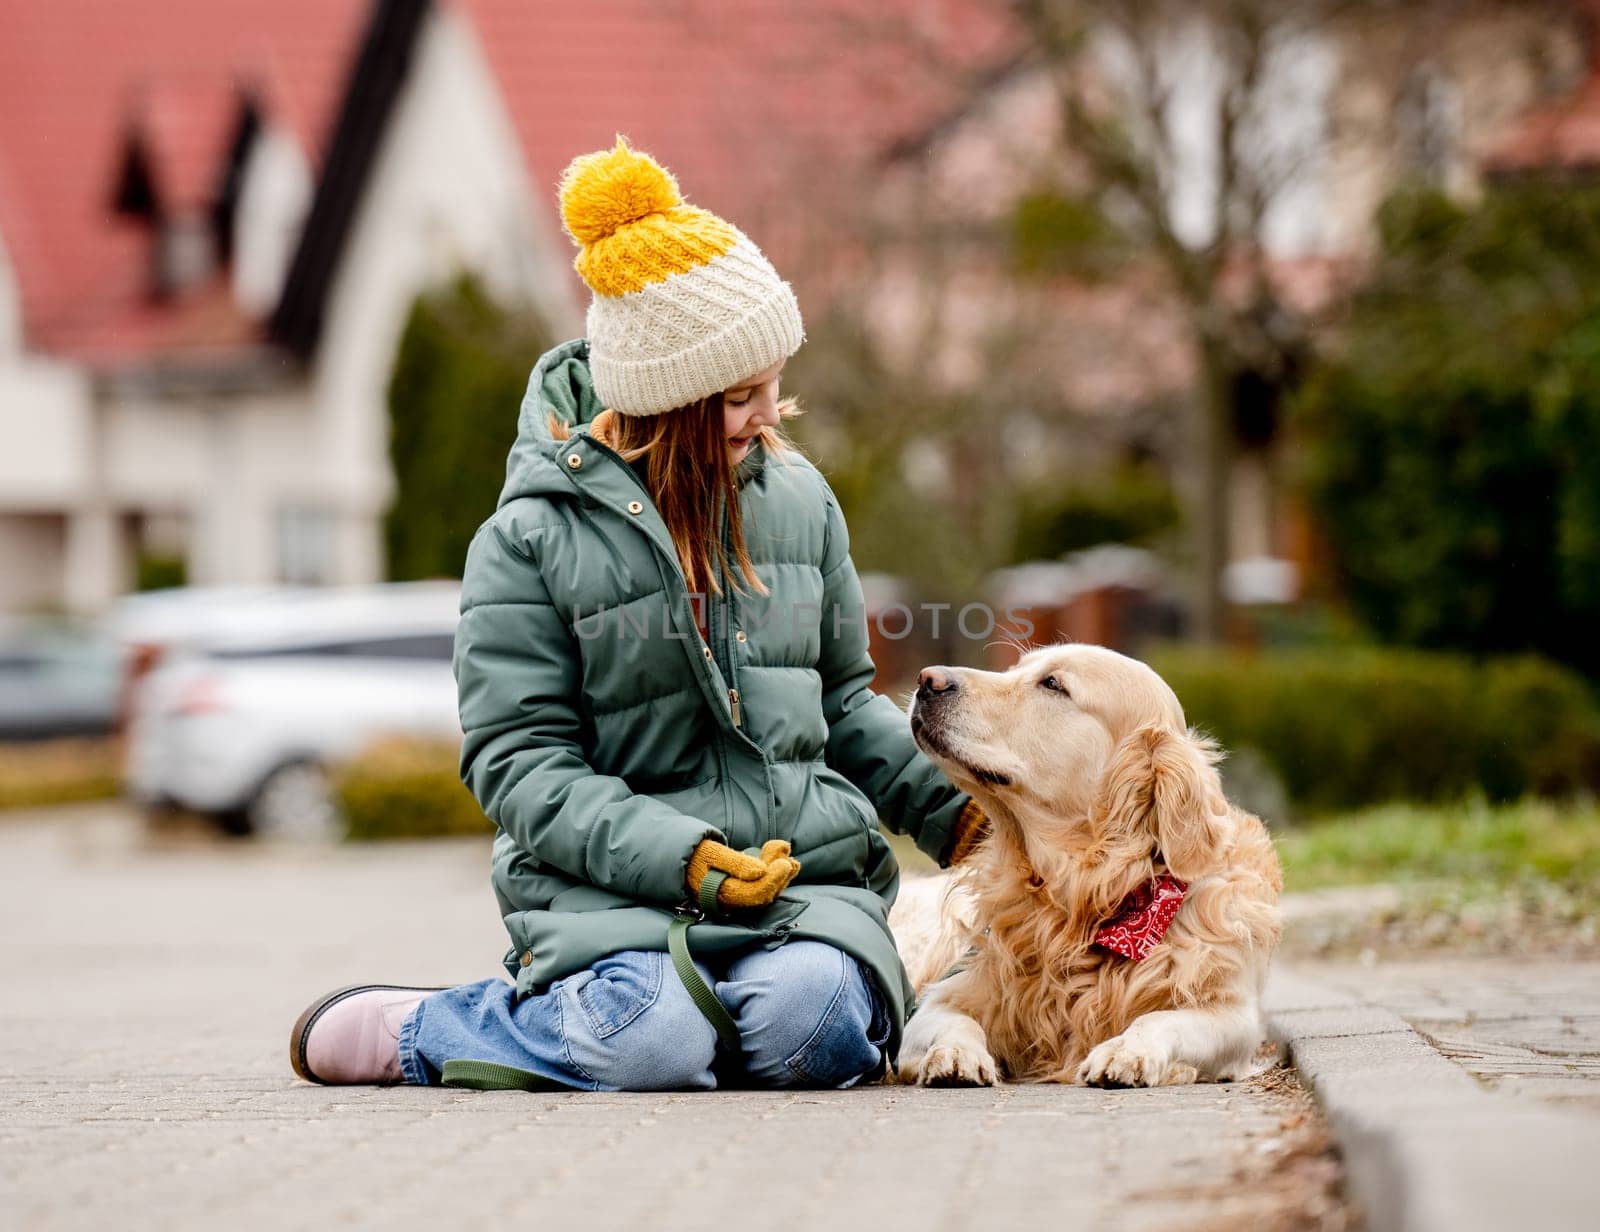 Preteen child girl sitting with golden retriever dog on asphalt at autumn street wearing hat and warm jacket. Pretty kid petting purebred pet doggy labrador outdoors at city